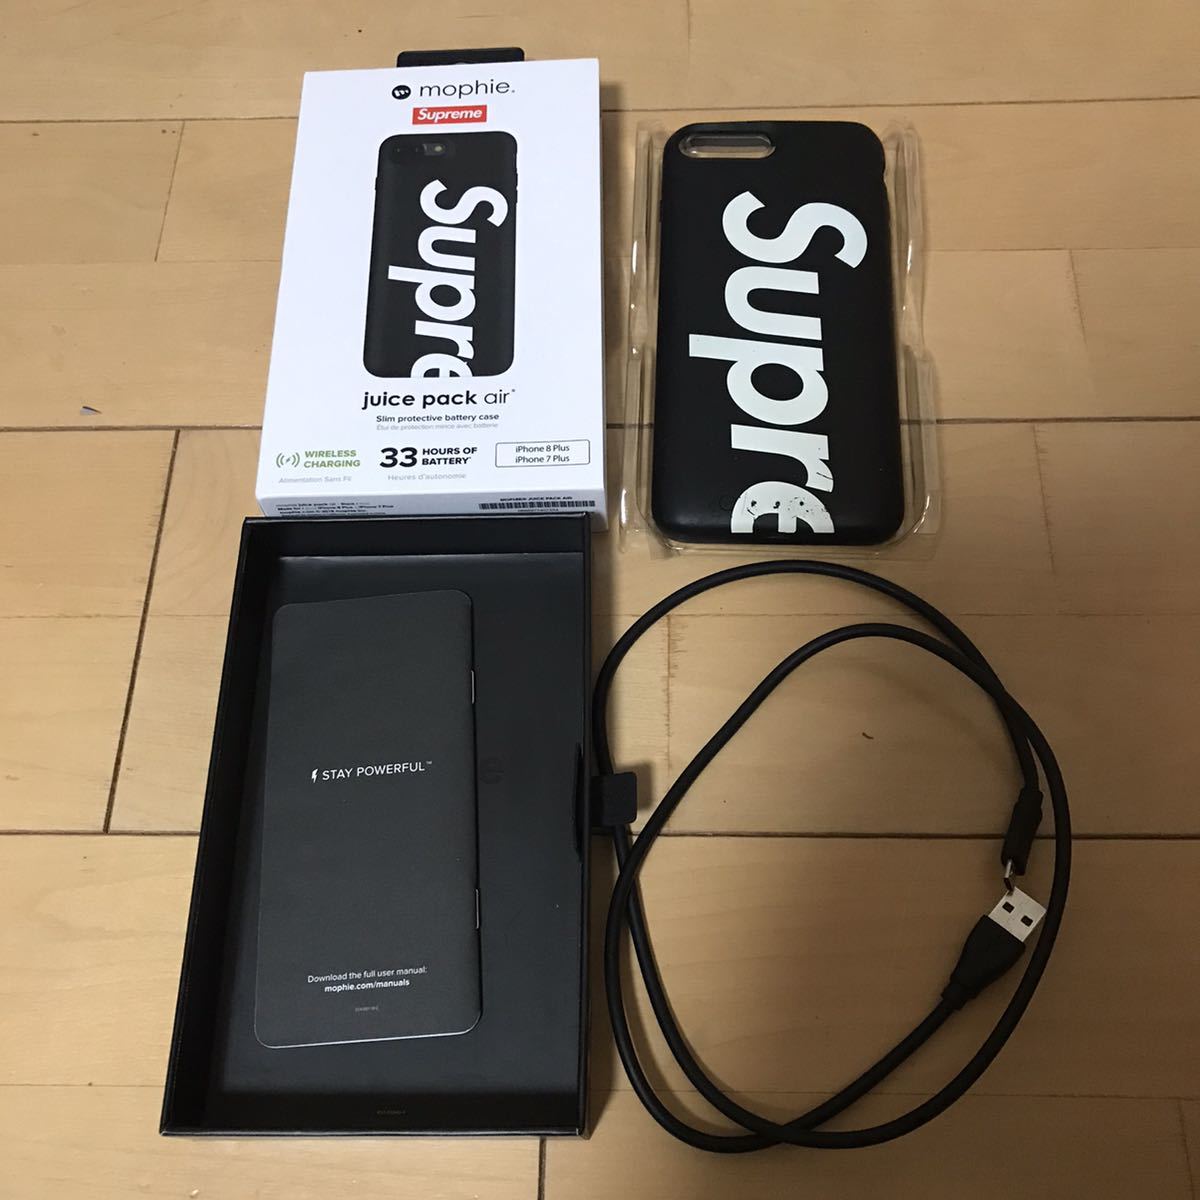 Supreme 18AW Mophie Juice Pack Air iPhone7 iPhone8 Plus Apple アップル